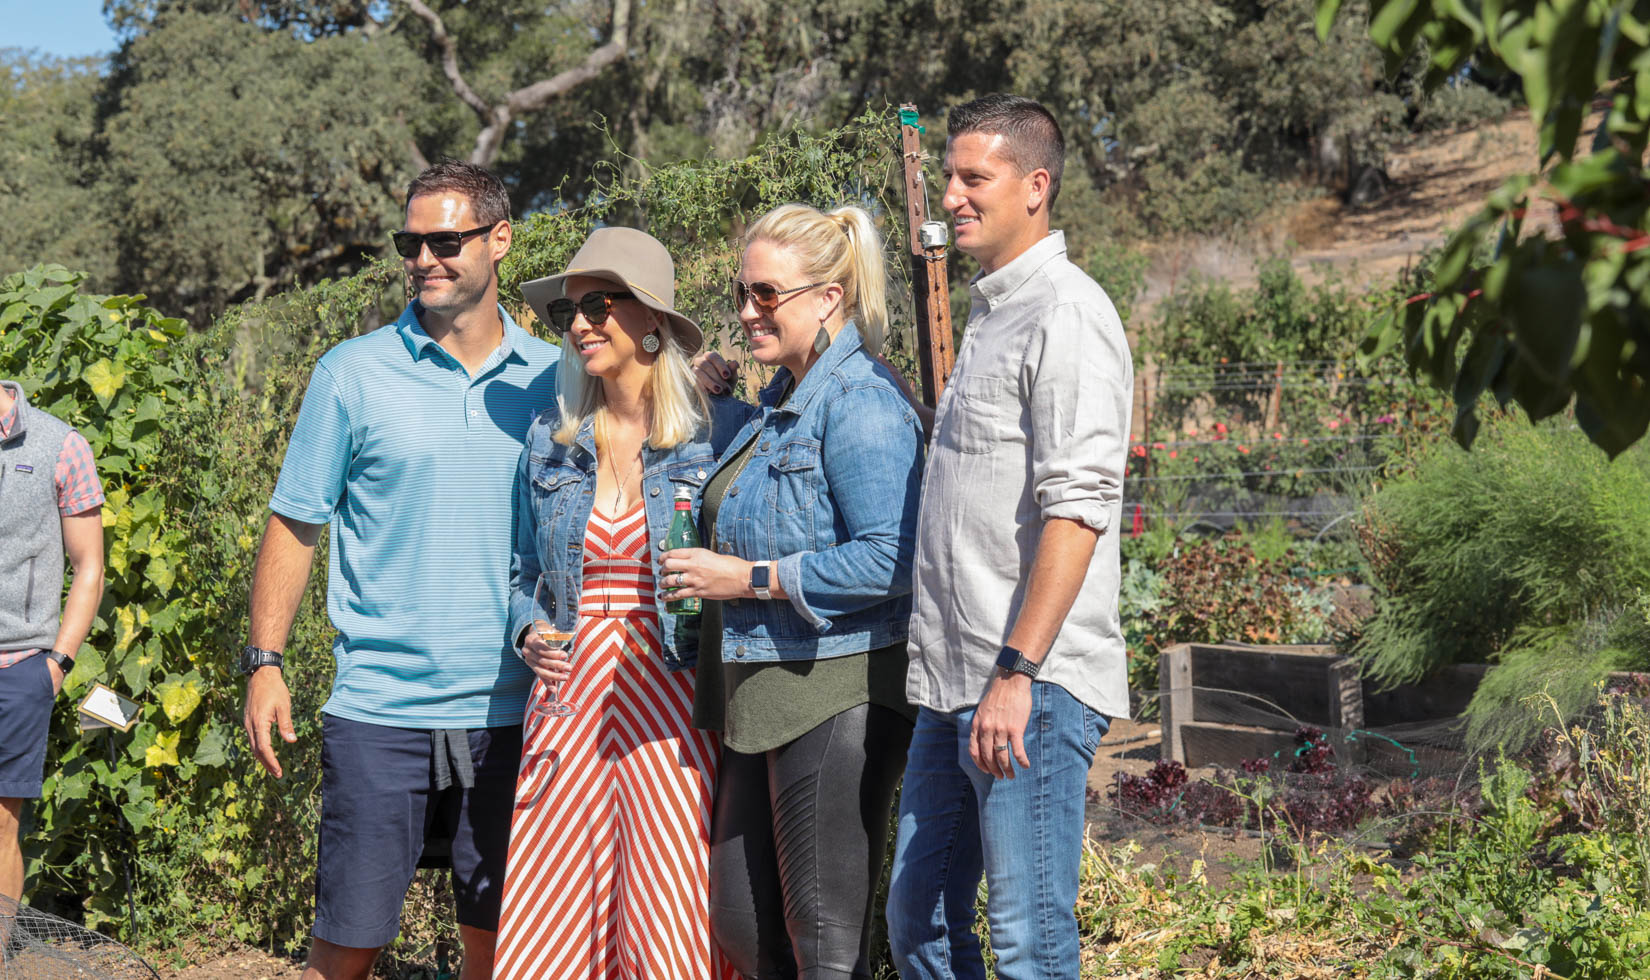 4 guests in the garden at Jordan Winery in wine country casual attire. The man on the left has a blue polo and shorts. Both women have denim jackets. The man on the right has a button down and jeans.